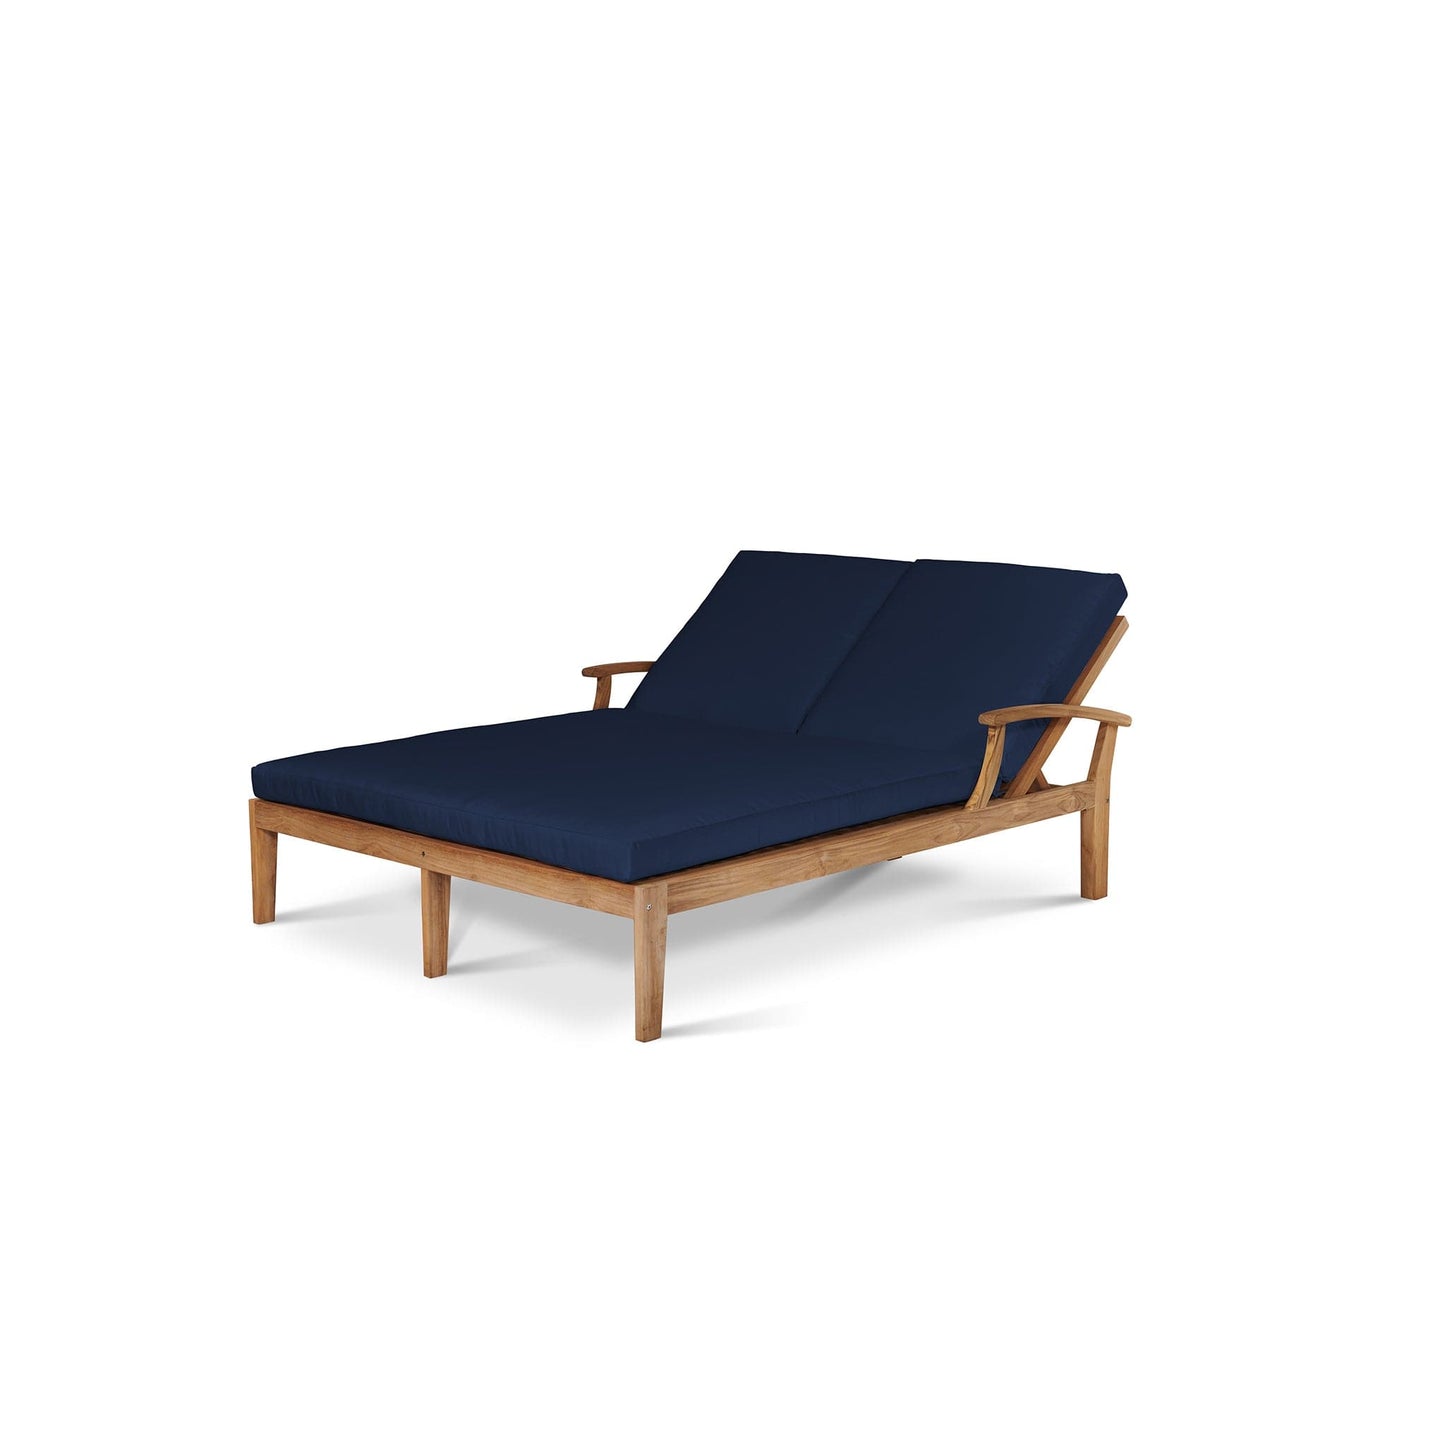 Delano Double Sunlounger With Cushion